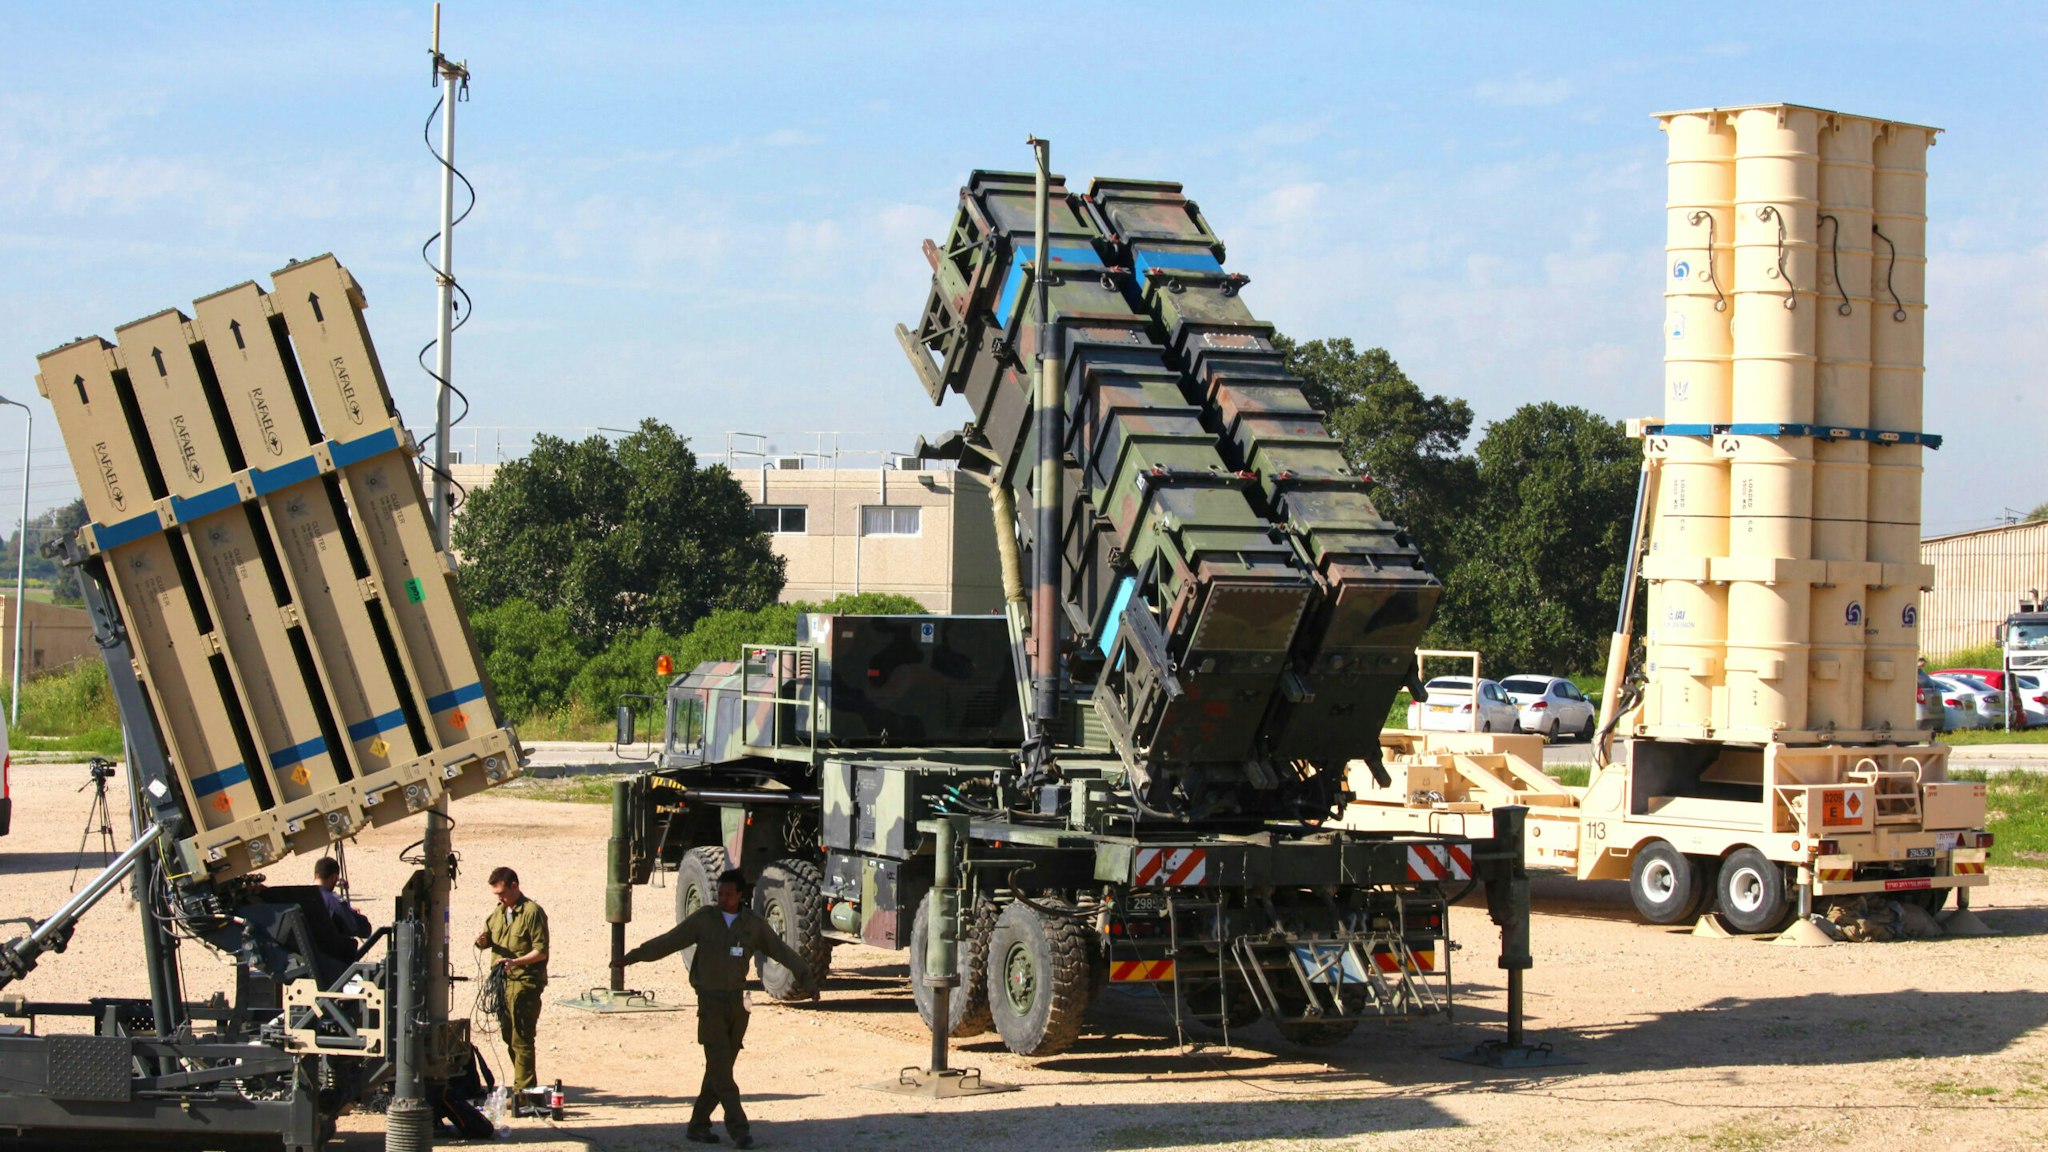 Israeli soldiers walk near an Israeli Irone Dome defence system (L), a surface-to-air missile (SAM) system, the MIM-104 Patriot (C), and an anti-ballistic missile the Arrow 3 (R) during Juniper Cobra's joint exercise press briefing at Hatzor Israeli Air Force Base in central Israel, on February 25, 2016. - Juniper Cobra, is held every two years where Israel and the United States train their militaries together to prepare against possible ballistic missile attacks, as well as allowing the armies to learn to better work together.